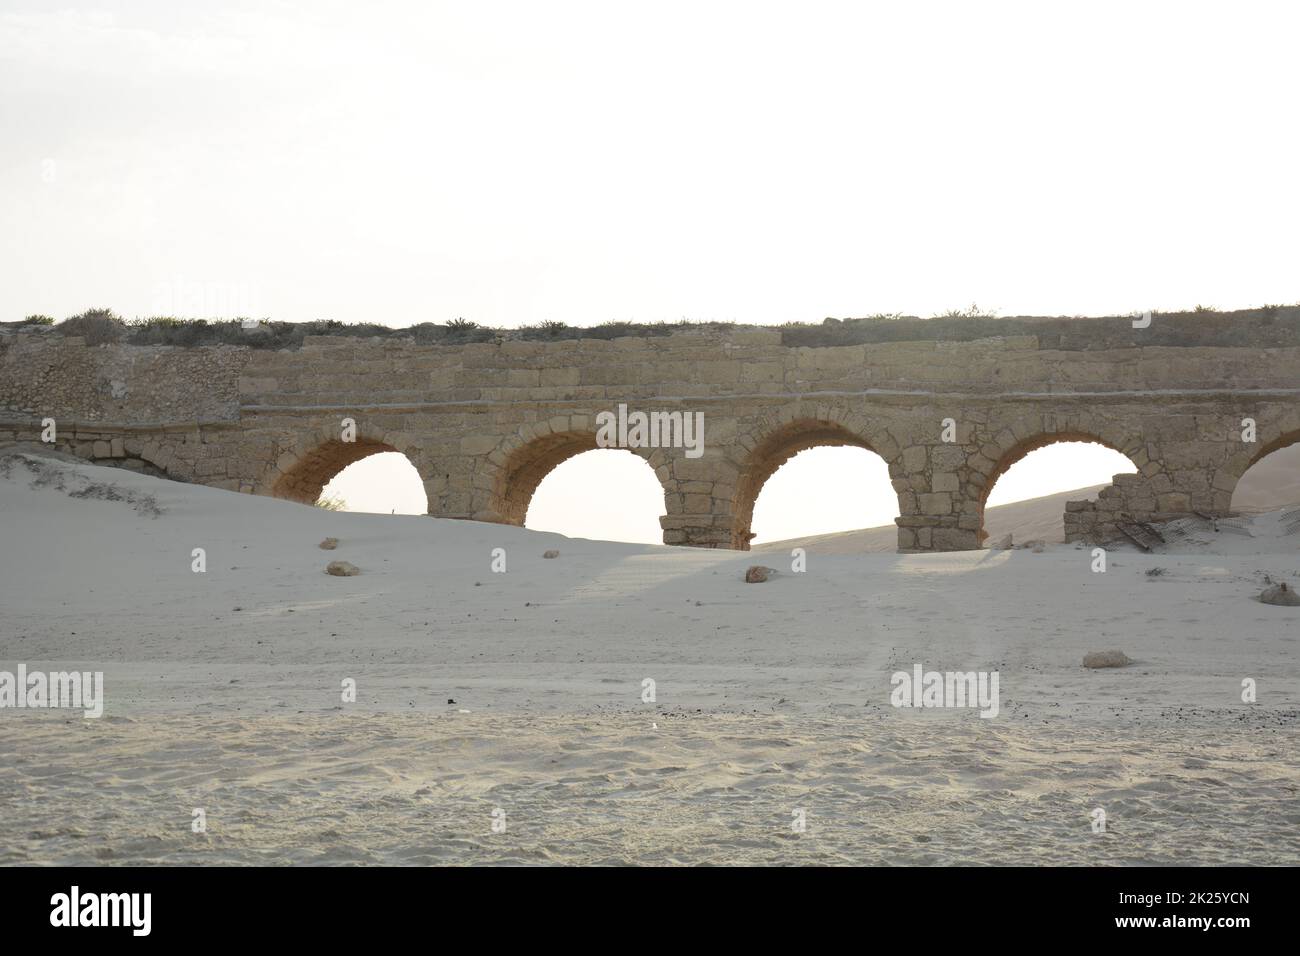 An old high level aqueduct. The remains of the Herodian aqueduct near the ancient city of Caesarea, Israel. Stock Photo